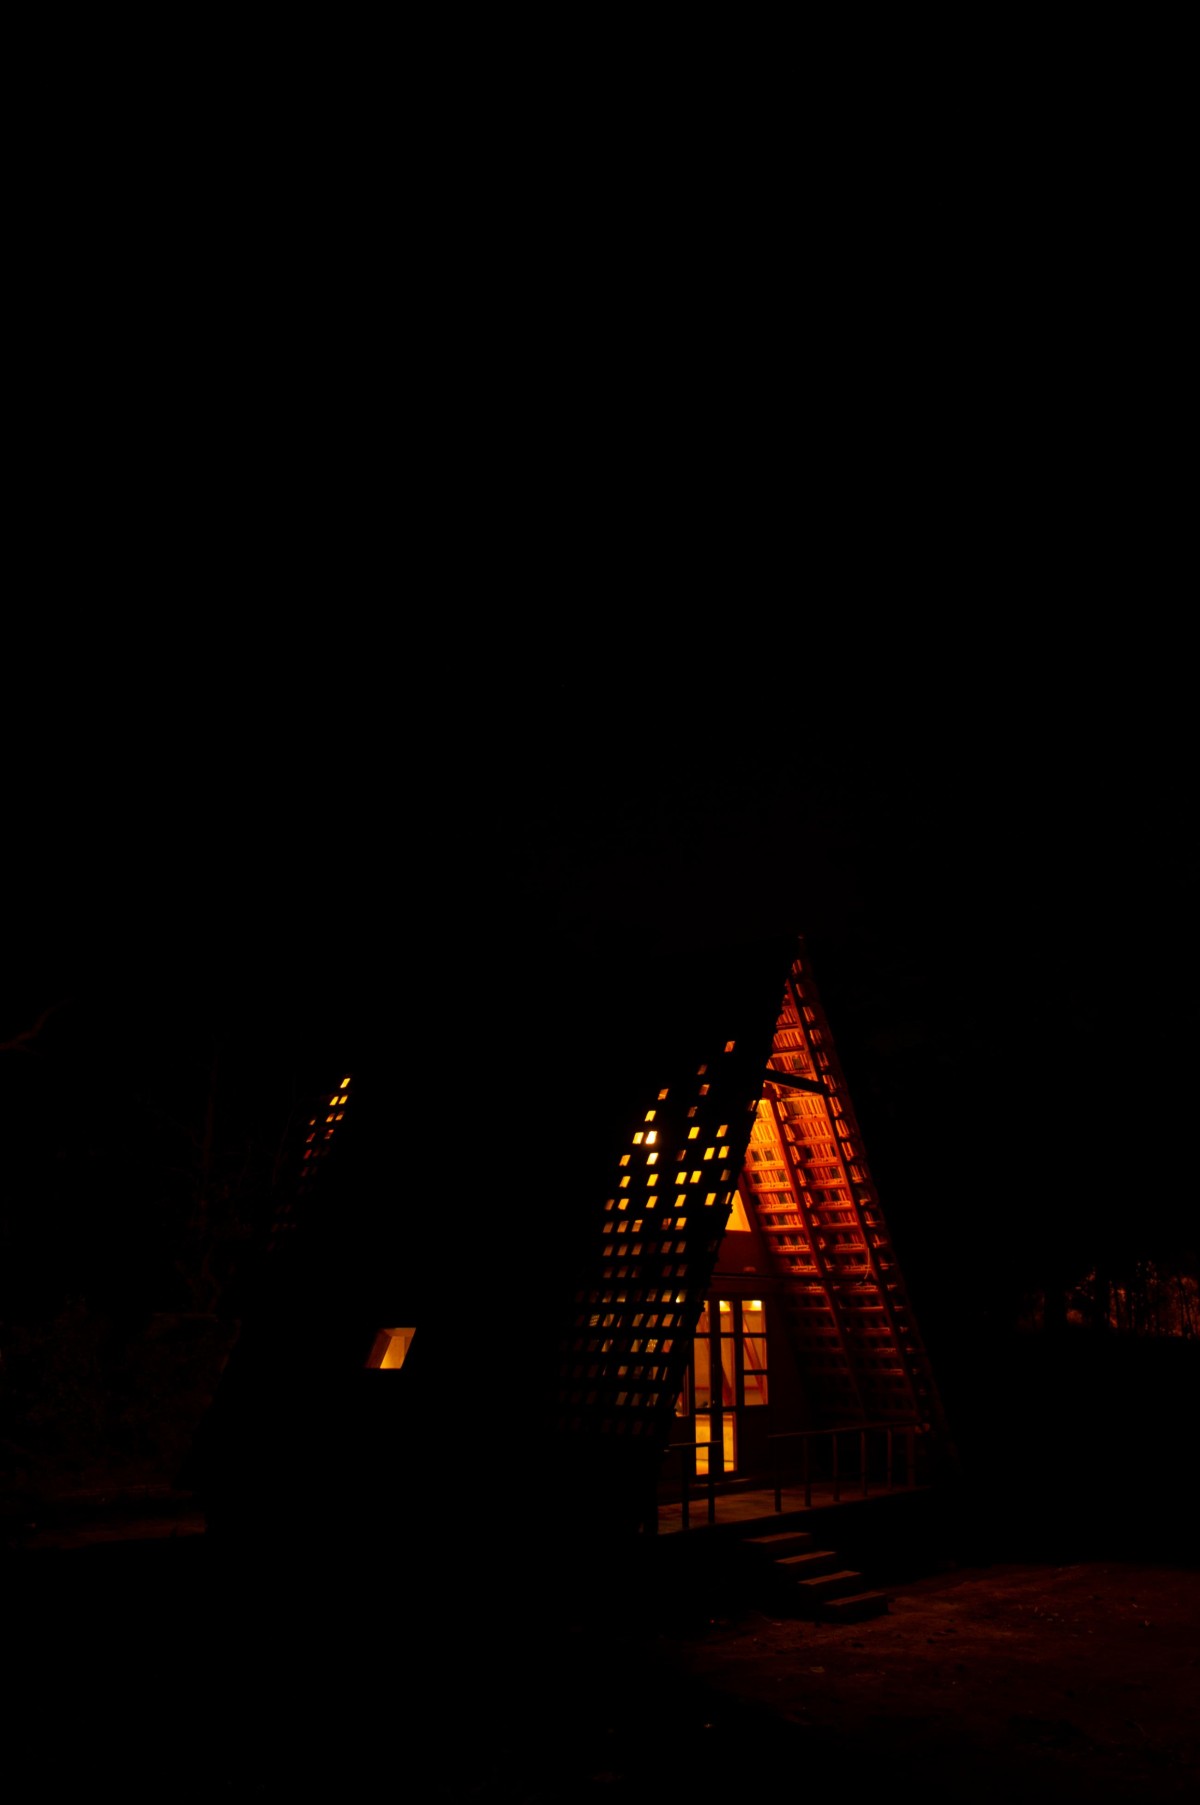 Night shot of exterior view of Solitude by Out Of The Box 0